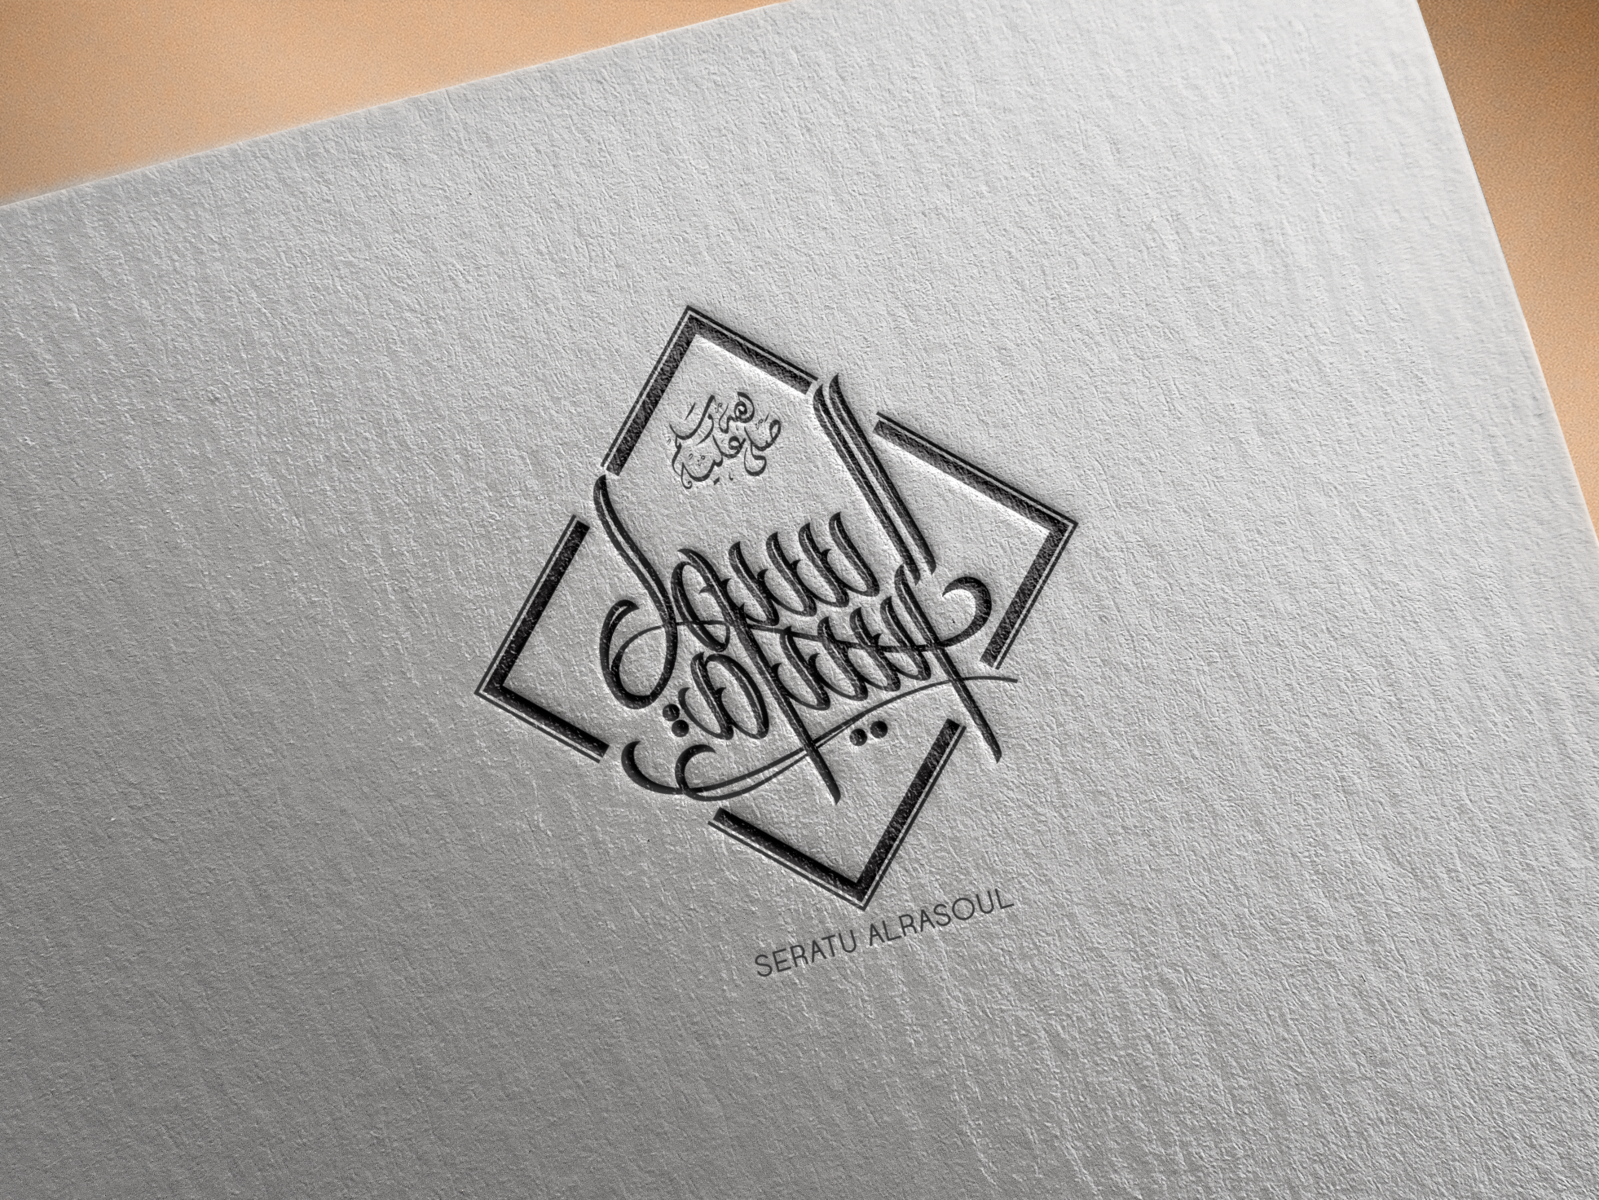 Free Logo Mockup Psd On Textured Paper by Ahmed Gaballa on Dribbble